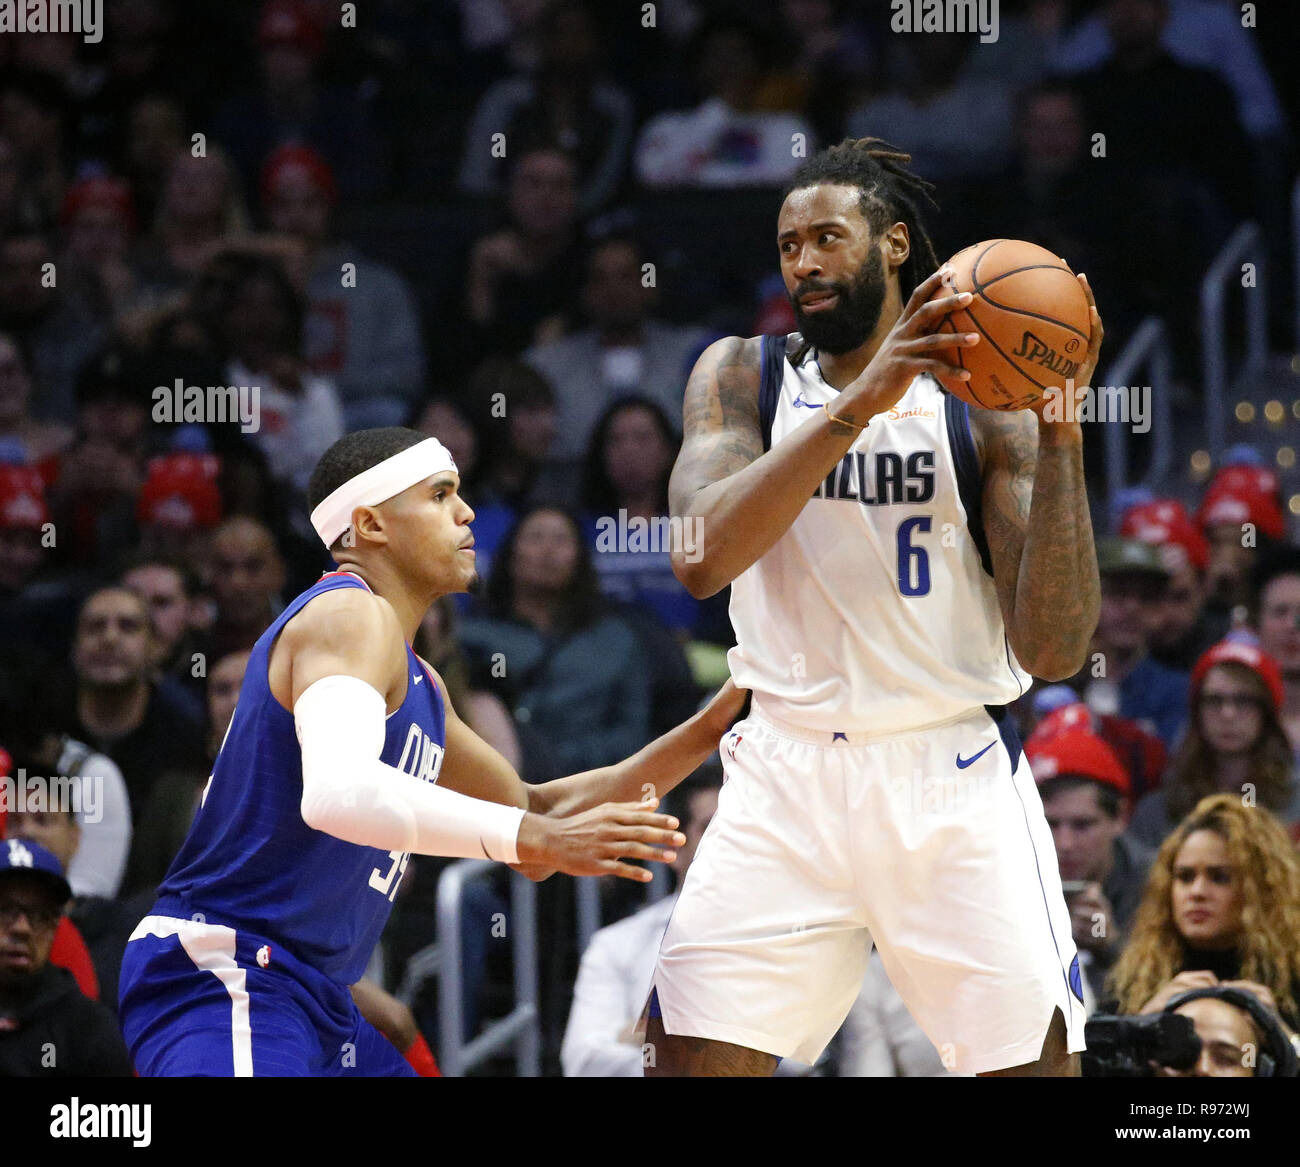 Los Angeles, California, USA. 20th Dec, 2018. Dallas Mavericks' DeAndre  Jordan (6) is defended by Los Angeles Clippers' Tobias Harris (34) in an NBA  basketball game between Los Angeles Clippers and Dallas